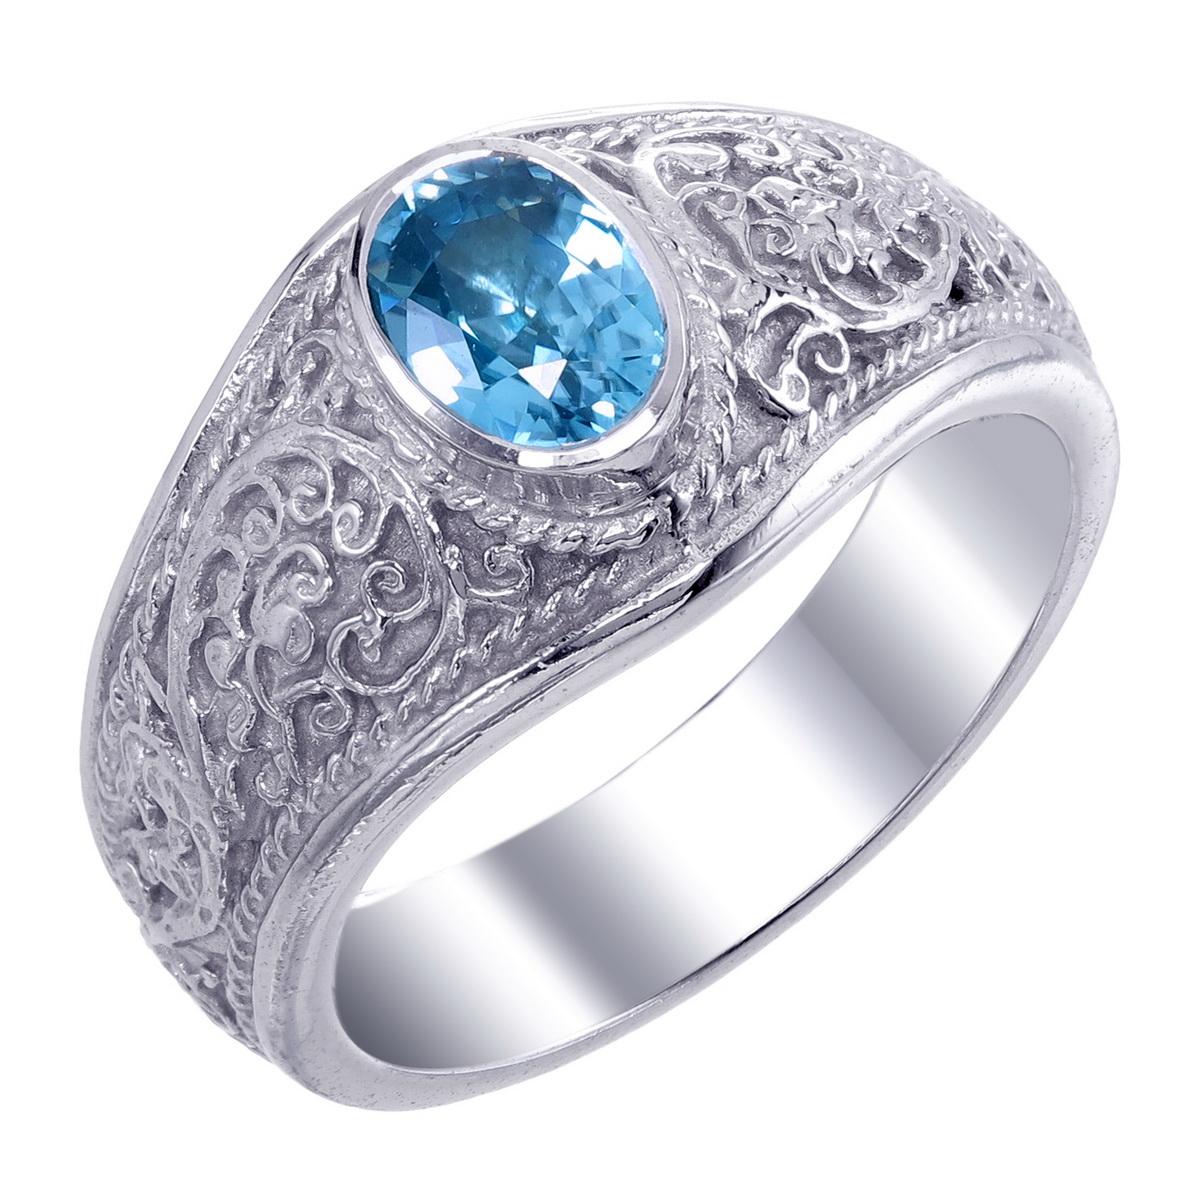 Orloff of Denmark; 1.35 carat Sky Blue Zircon set in an Artistic, Solitaire 925 Sterling Silver Ring.

This peace has been meticulously hand-crafted out of 925 sterling silver.
Featured on this peace is a natural blue zircon mined, polished and cut